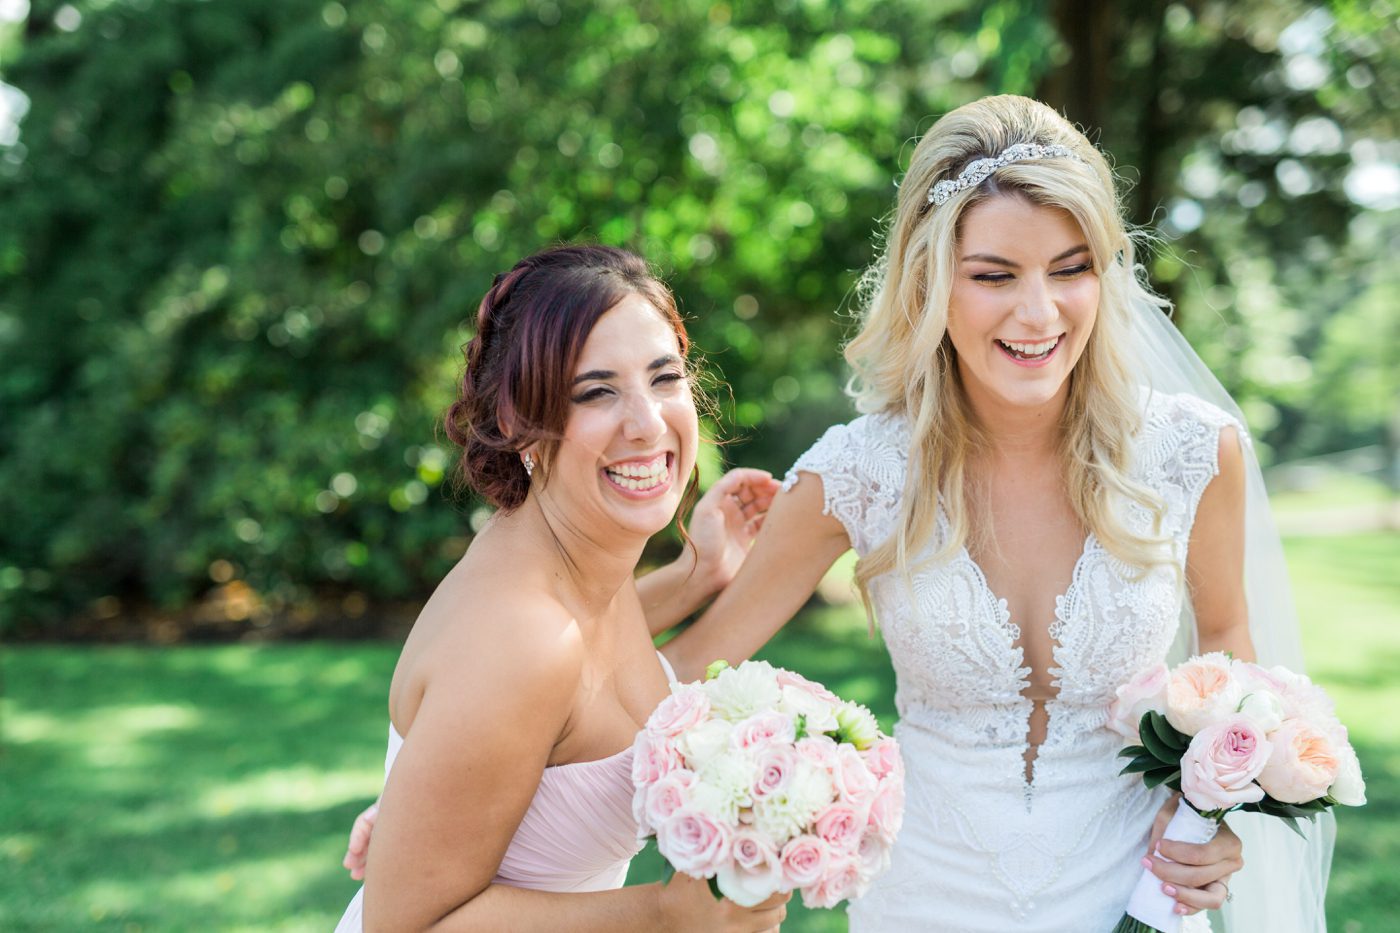 Pic of bride and bridesmaid laughing